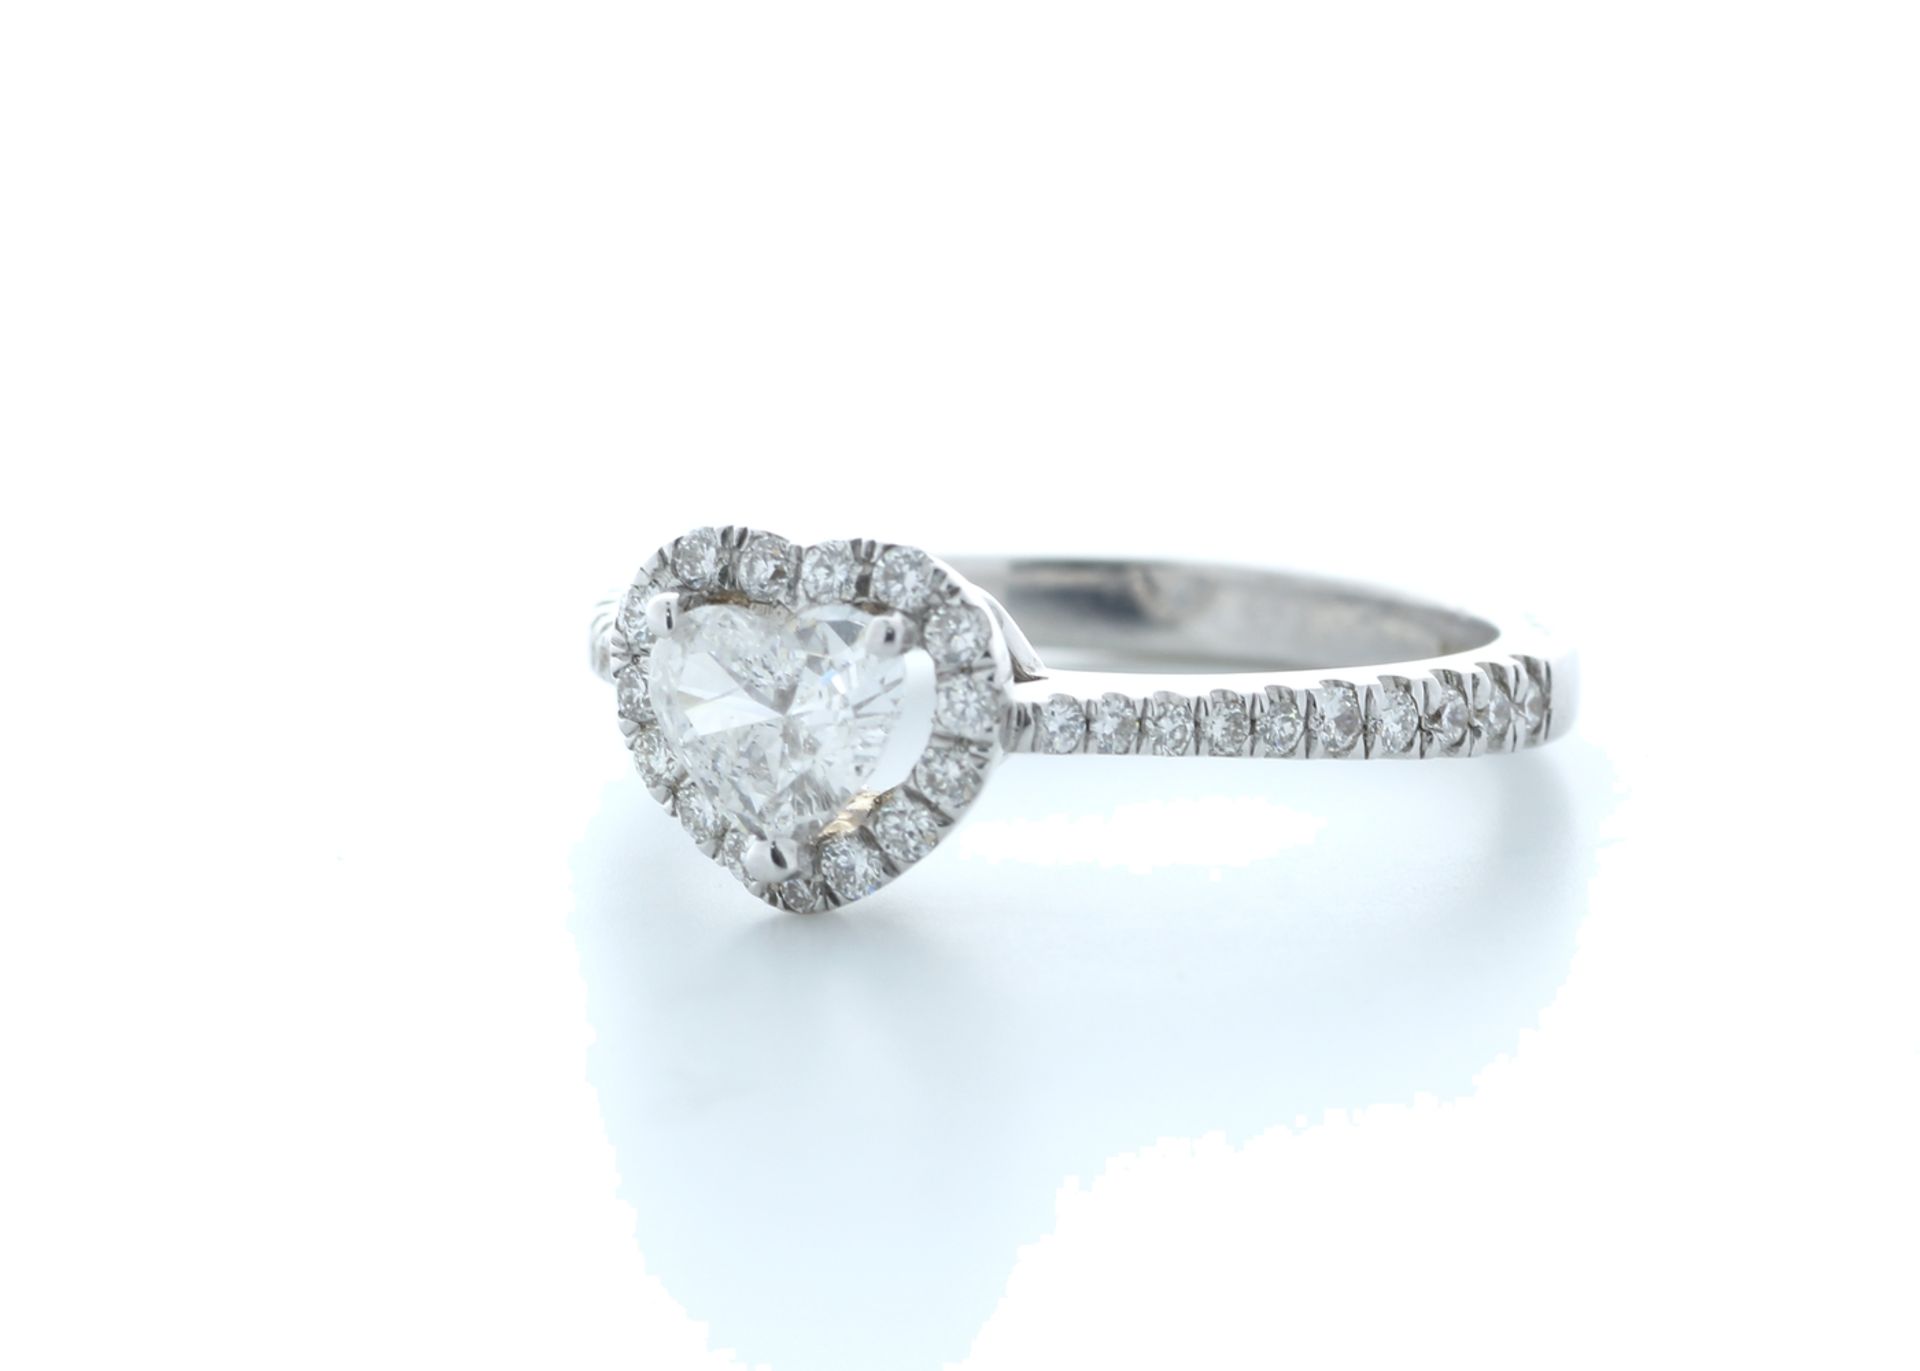 18ct White Gold Heart Shape Diamond With Halo Setting Ring 0.77 (0.45) Carats - Valued by IDI £4, - Image 2 of 5